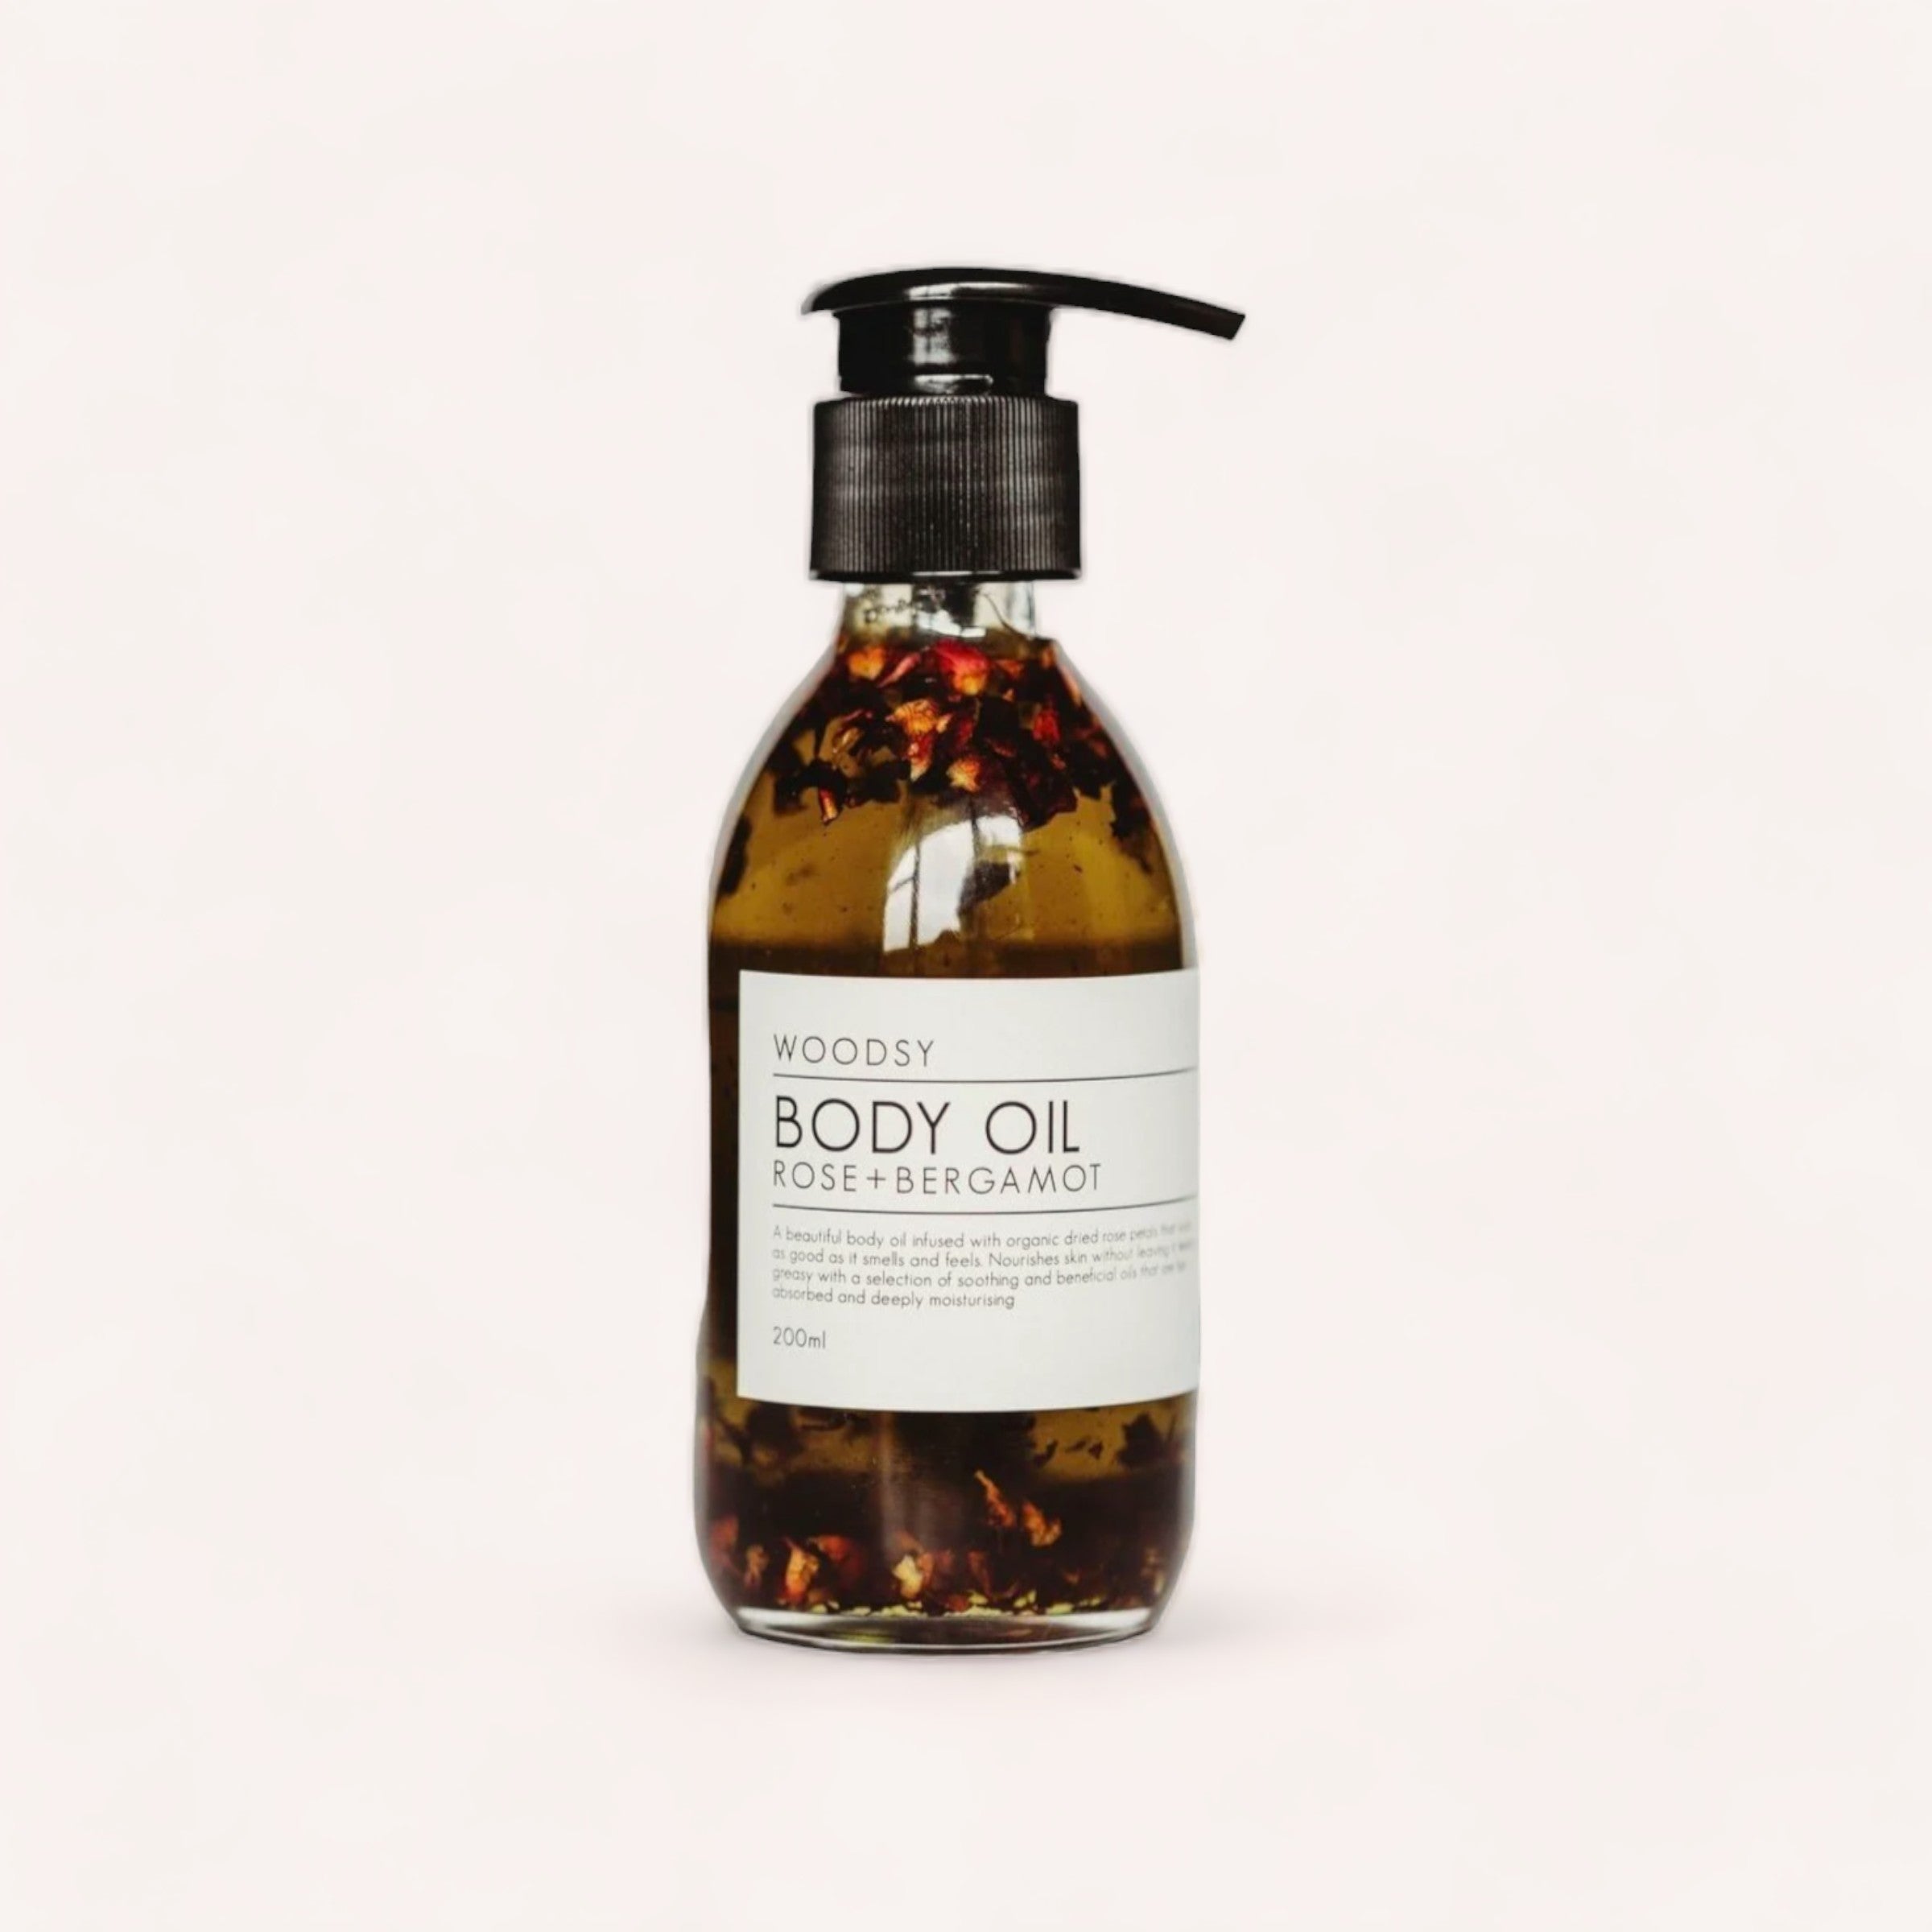 A clear bottle of Body Oil - Rose & Bergamot by Woodsy Botanics, with visible organic rose petals and leaves suspended in the oil, against a plain white background.